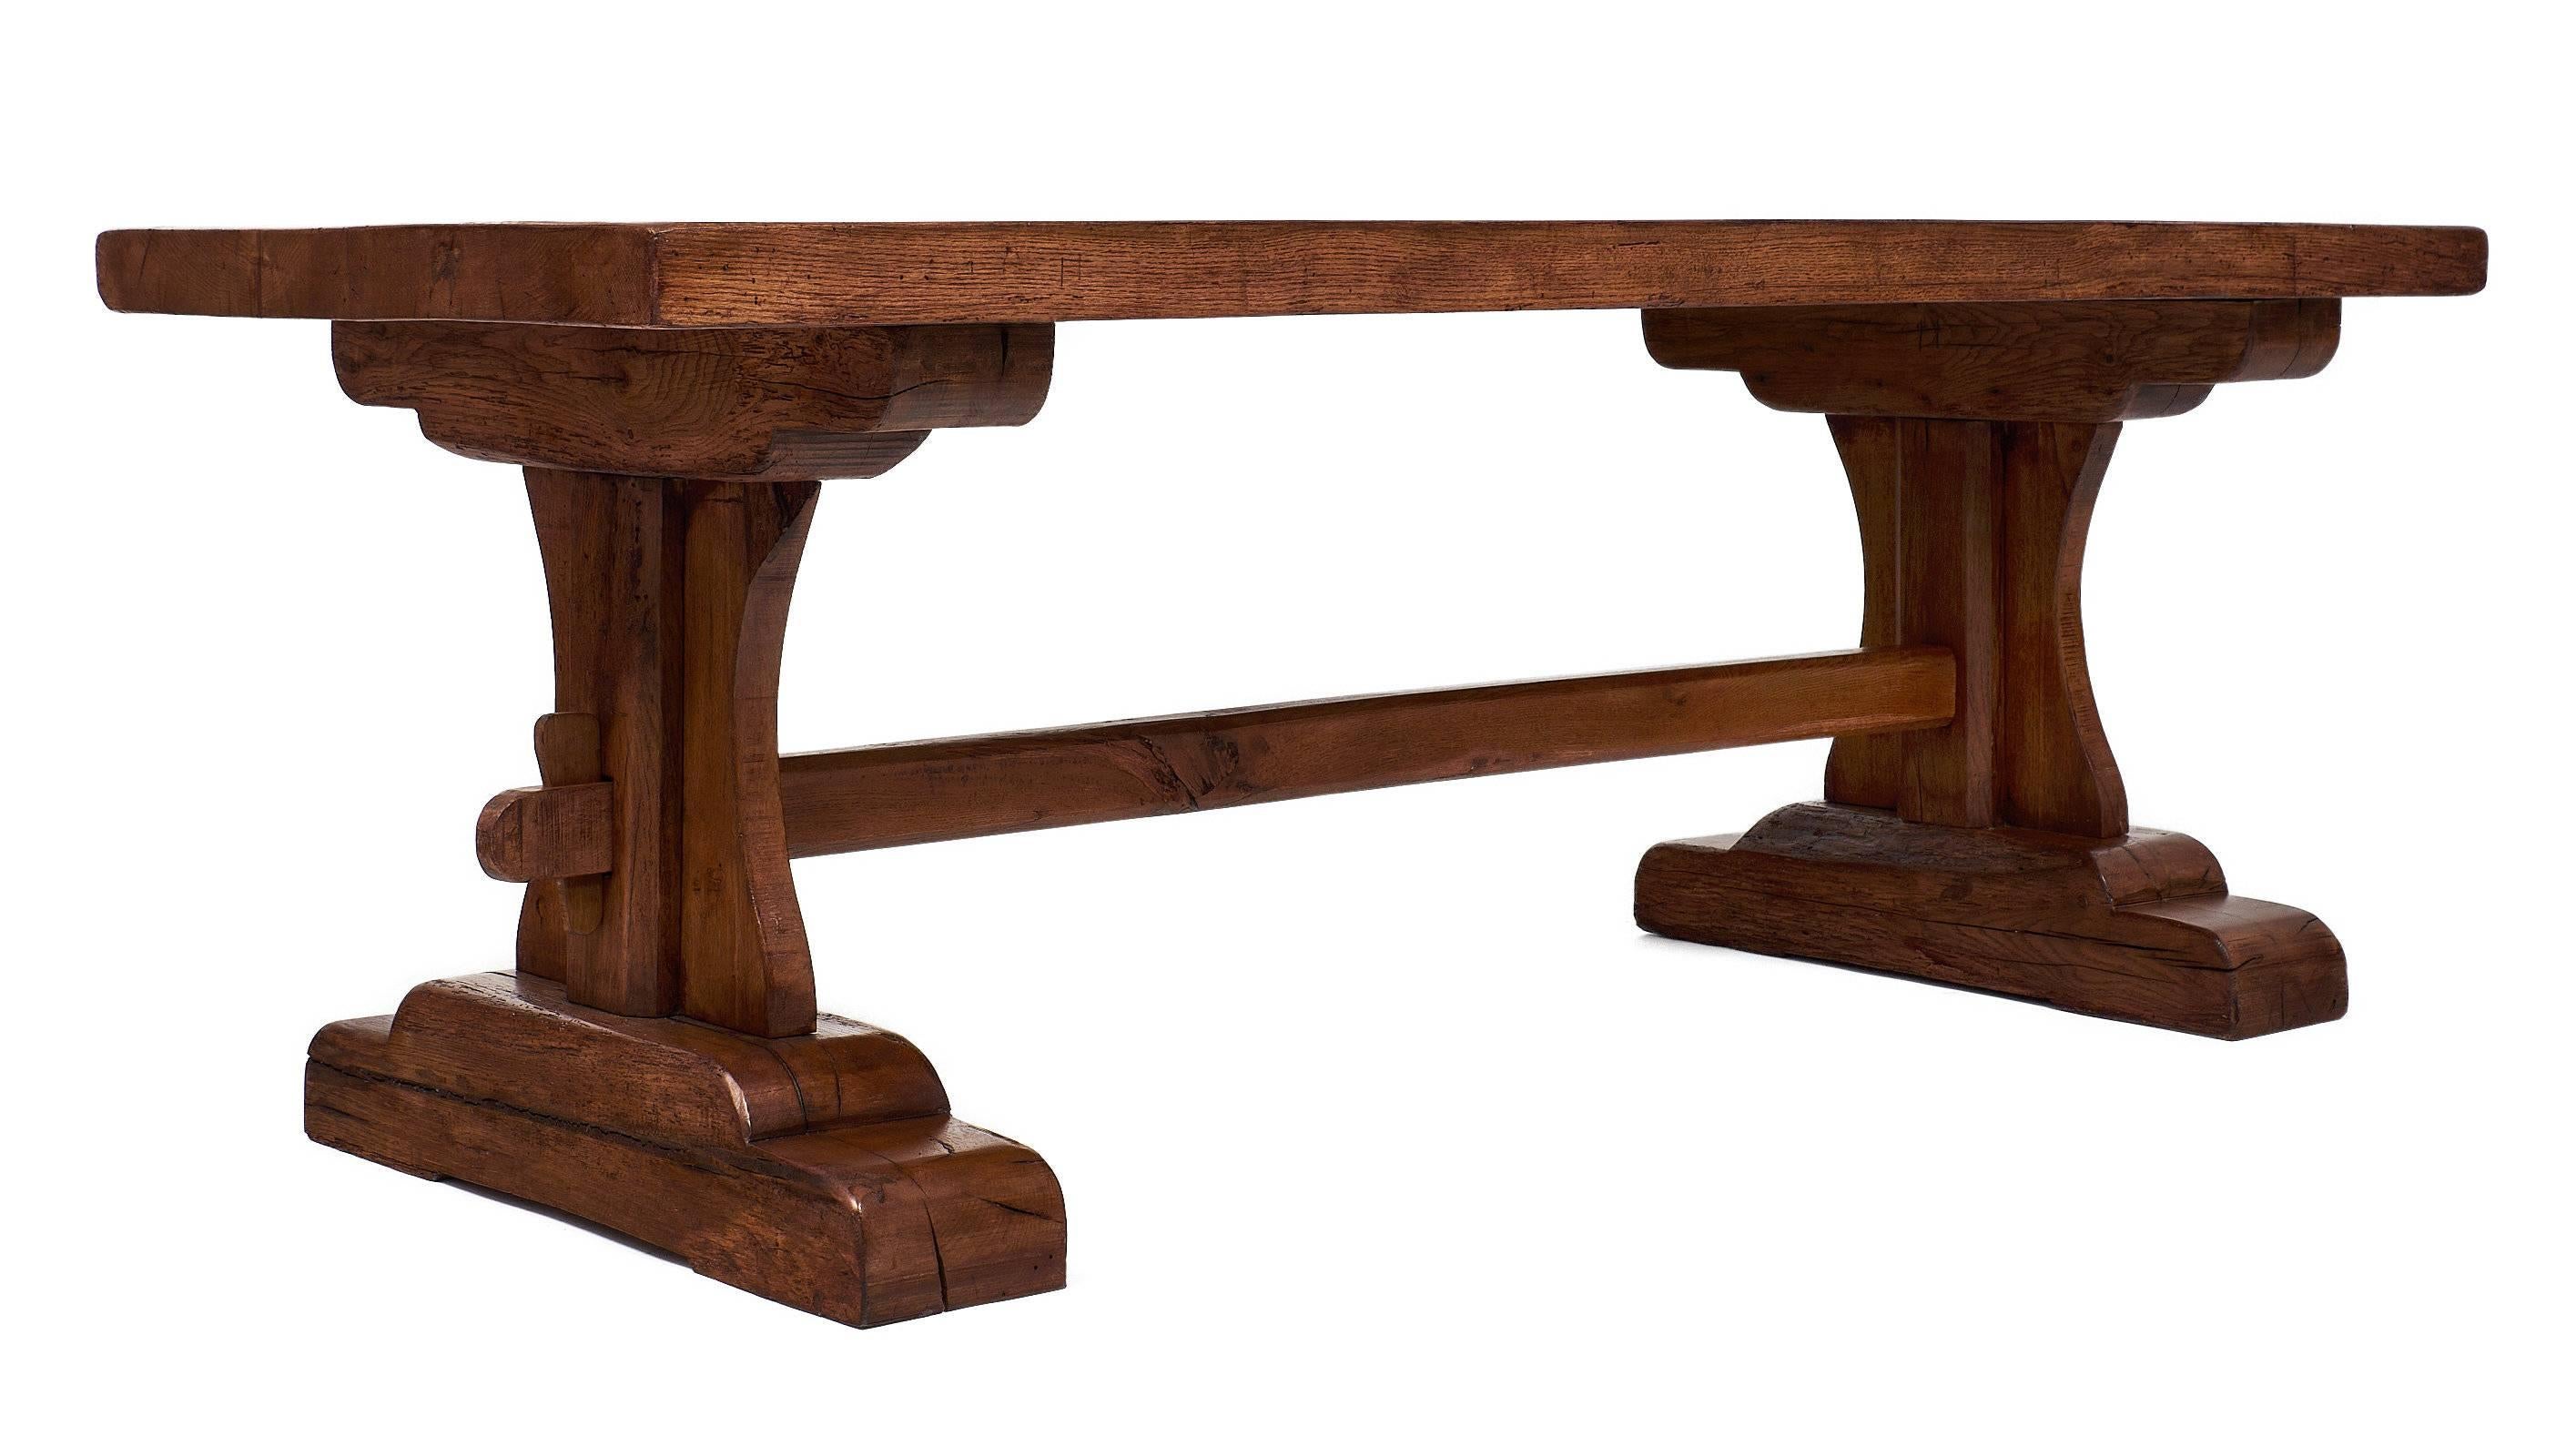 Strong, beautiful French monastery table of solid oak from Beaune in burgundy with a hand rubbed wax finish. We loved the thick wood slab on top of the bold pedestals, the stretcher holds them together with keys on both ends. Although very stabile,